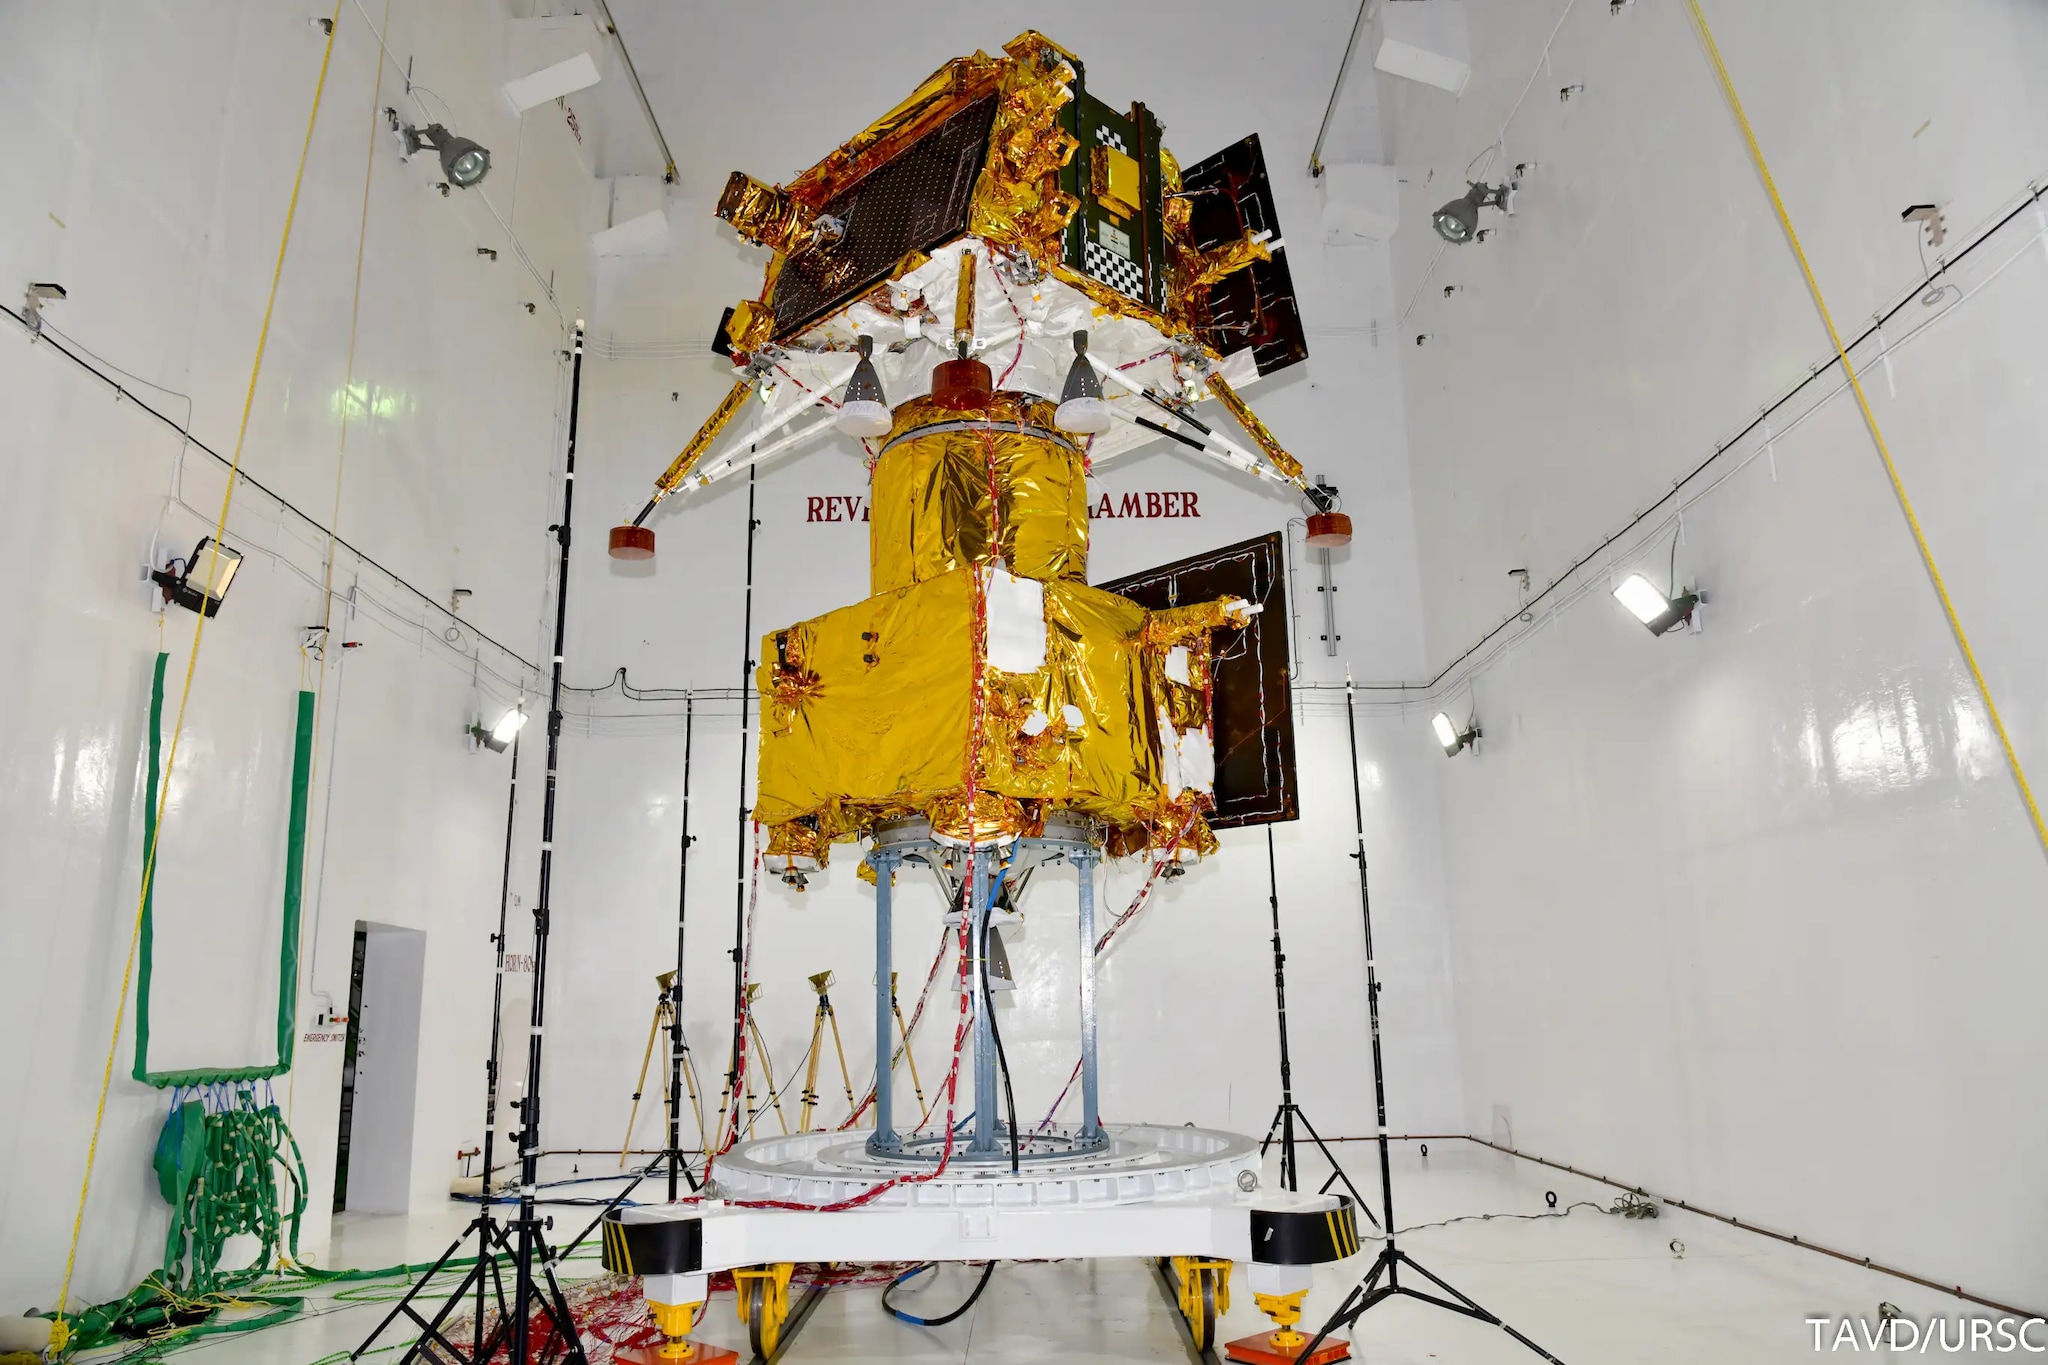 India to Launch Chandrayaan-2 Moon Lander Mission July 22 | Space